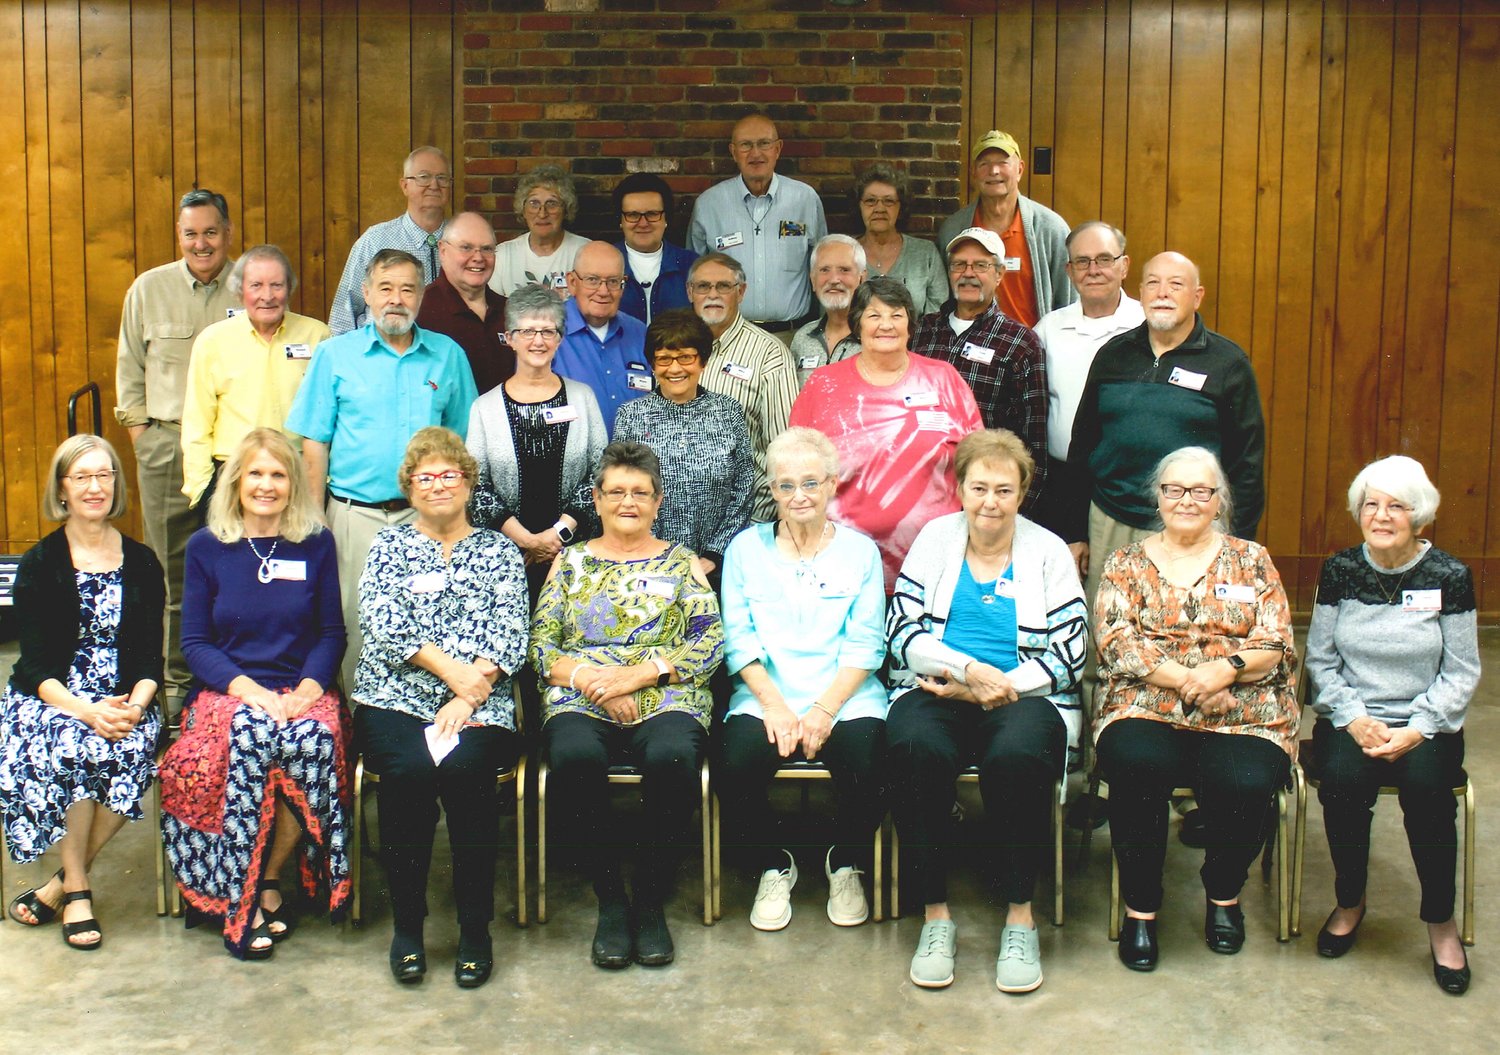 The Moberly High School Class of 1967 poses for a photo during its 55th reunion in October. The class attended Moberly Junior College during its junior and senior years.